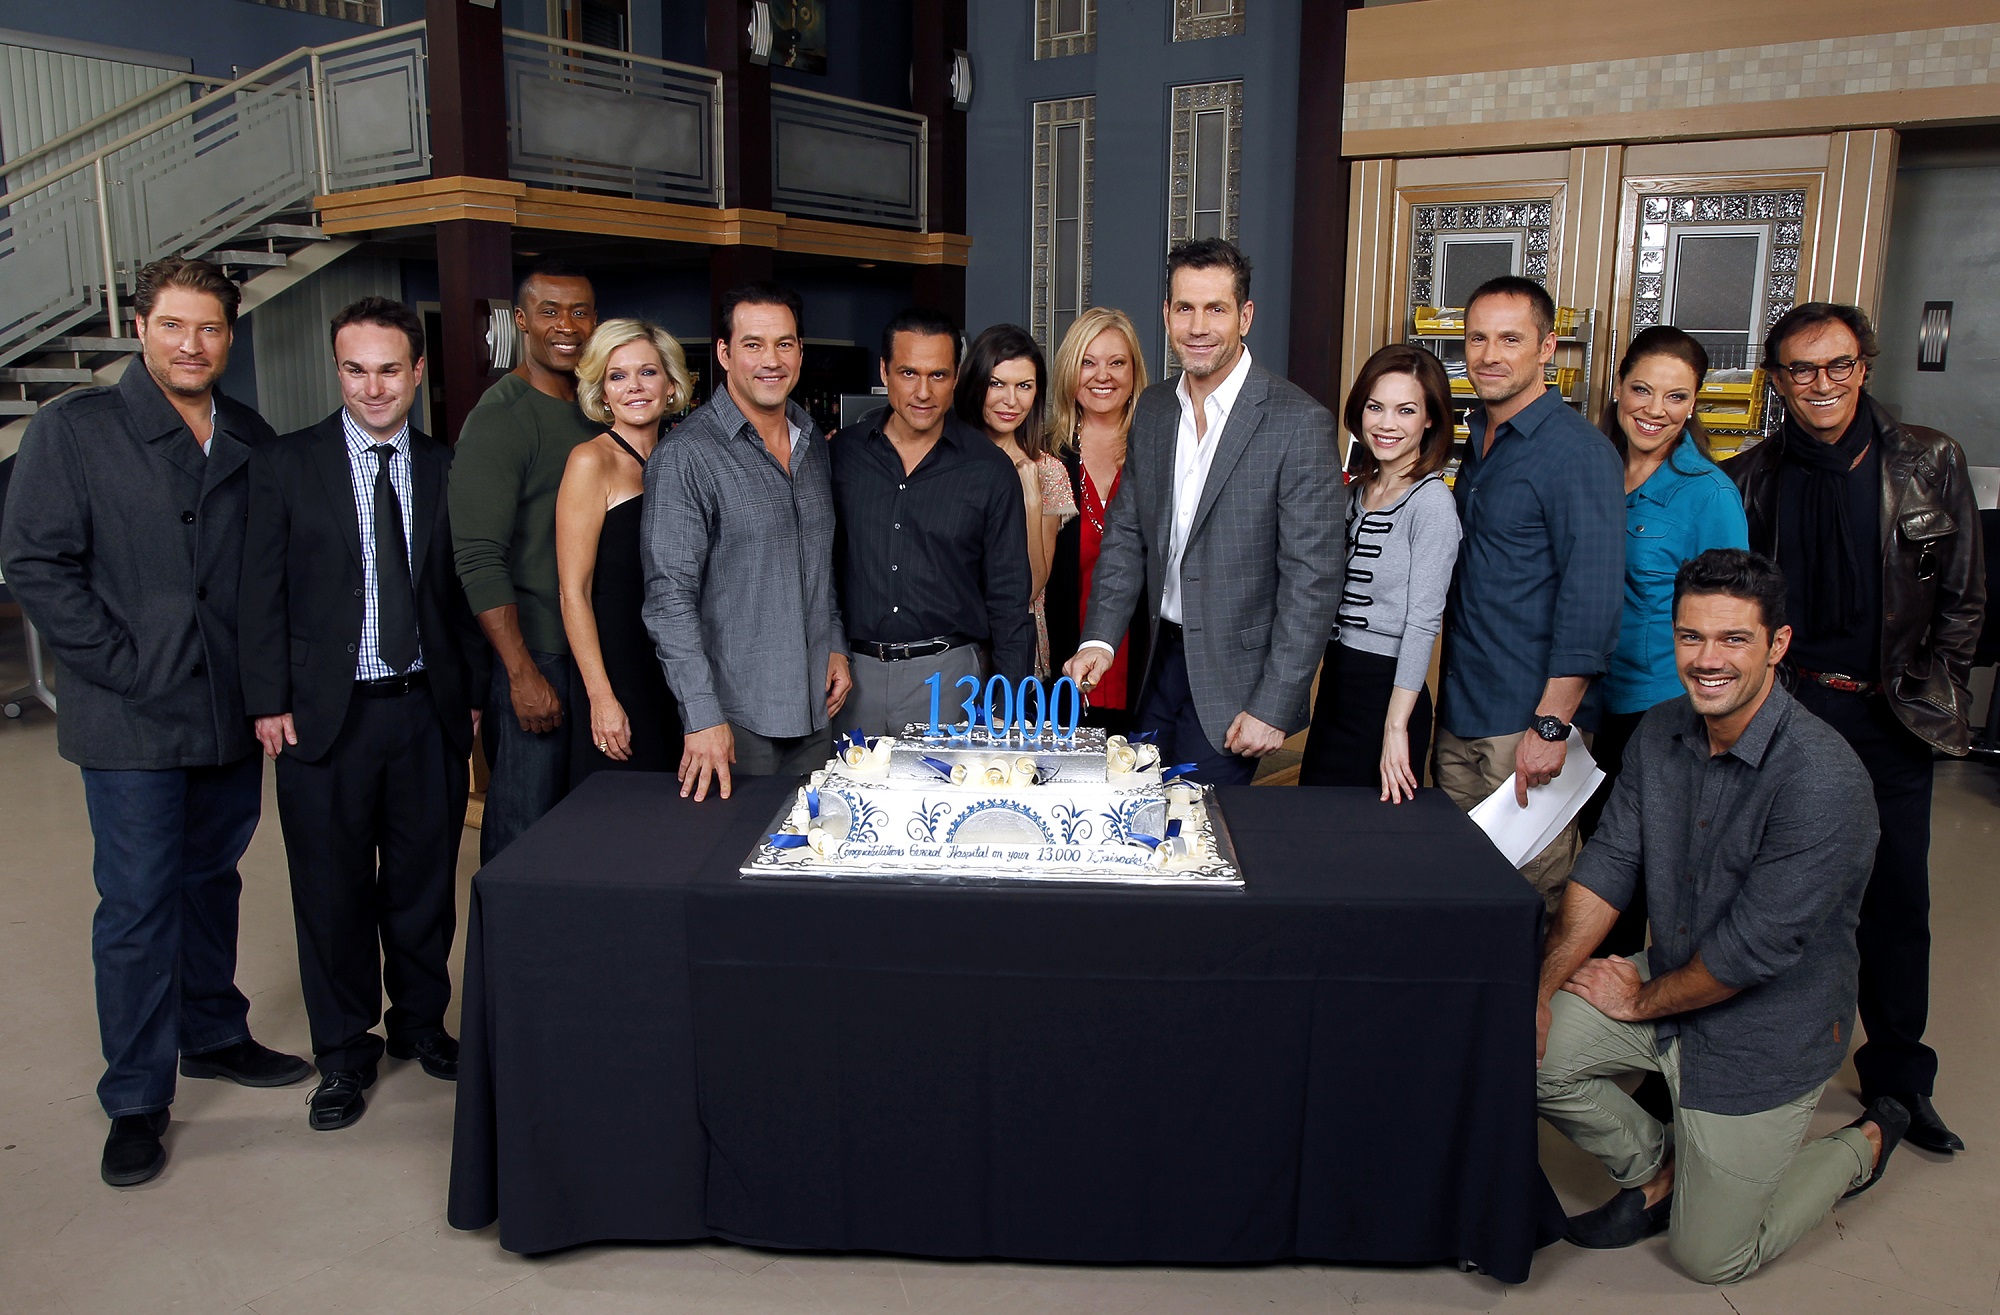 Which members of the General Hospital cast have the highest net worth?